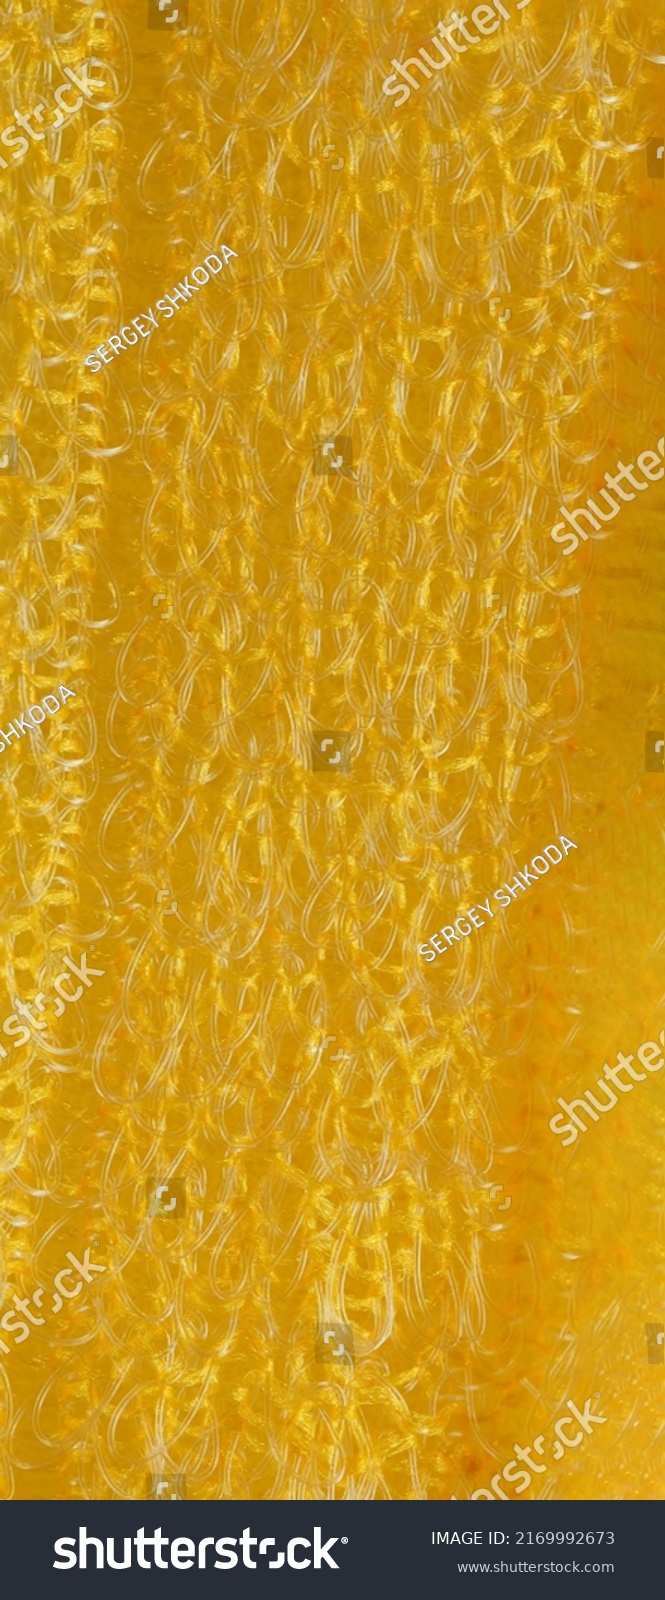 closeup, background, texture, large long vertical banner. heterogeneous surface structure bright saturated yellow sponge for washing dishes, kitchen, bath. full depth of field. high resolution photo #2169992673